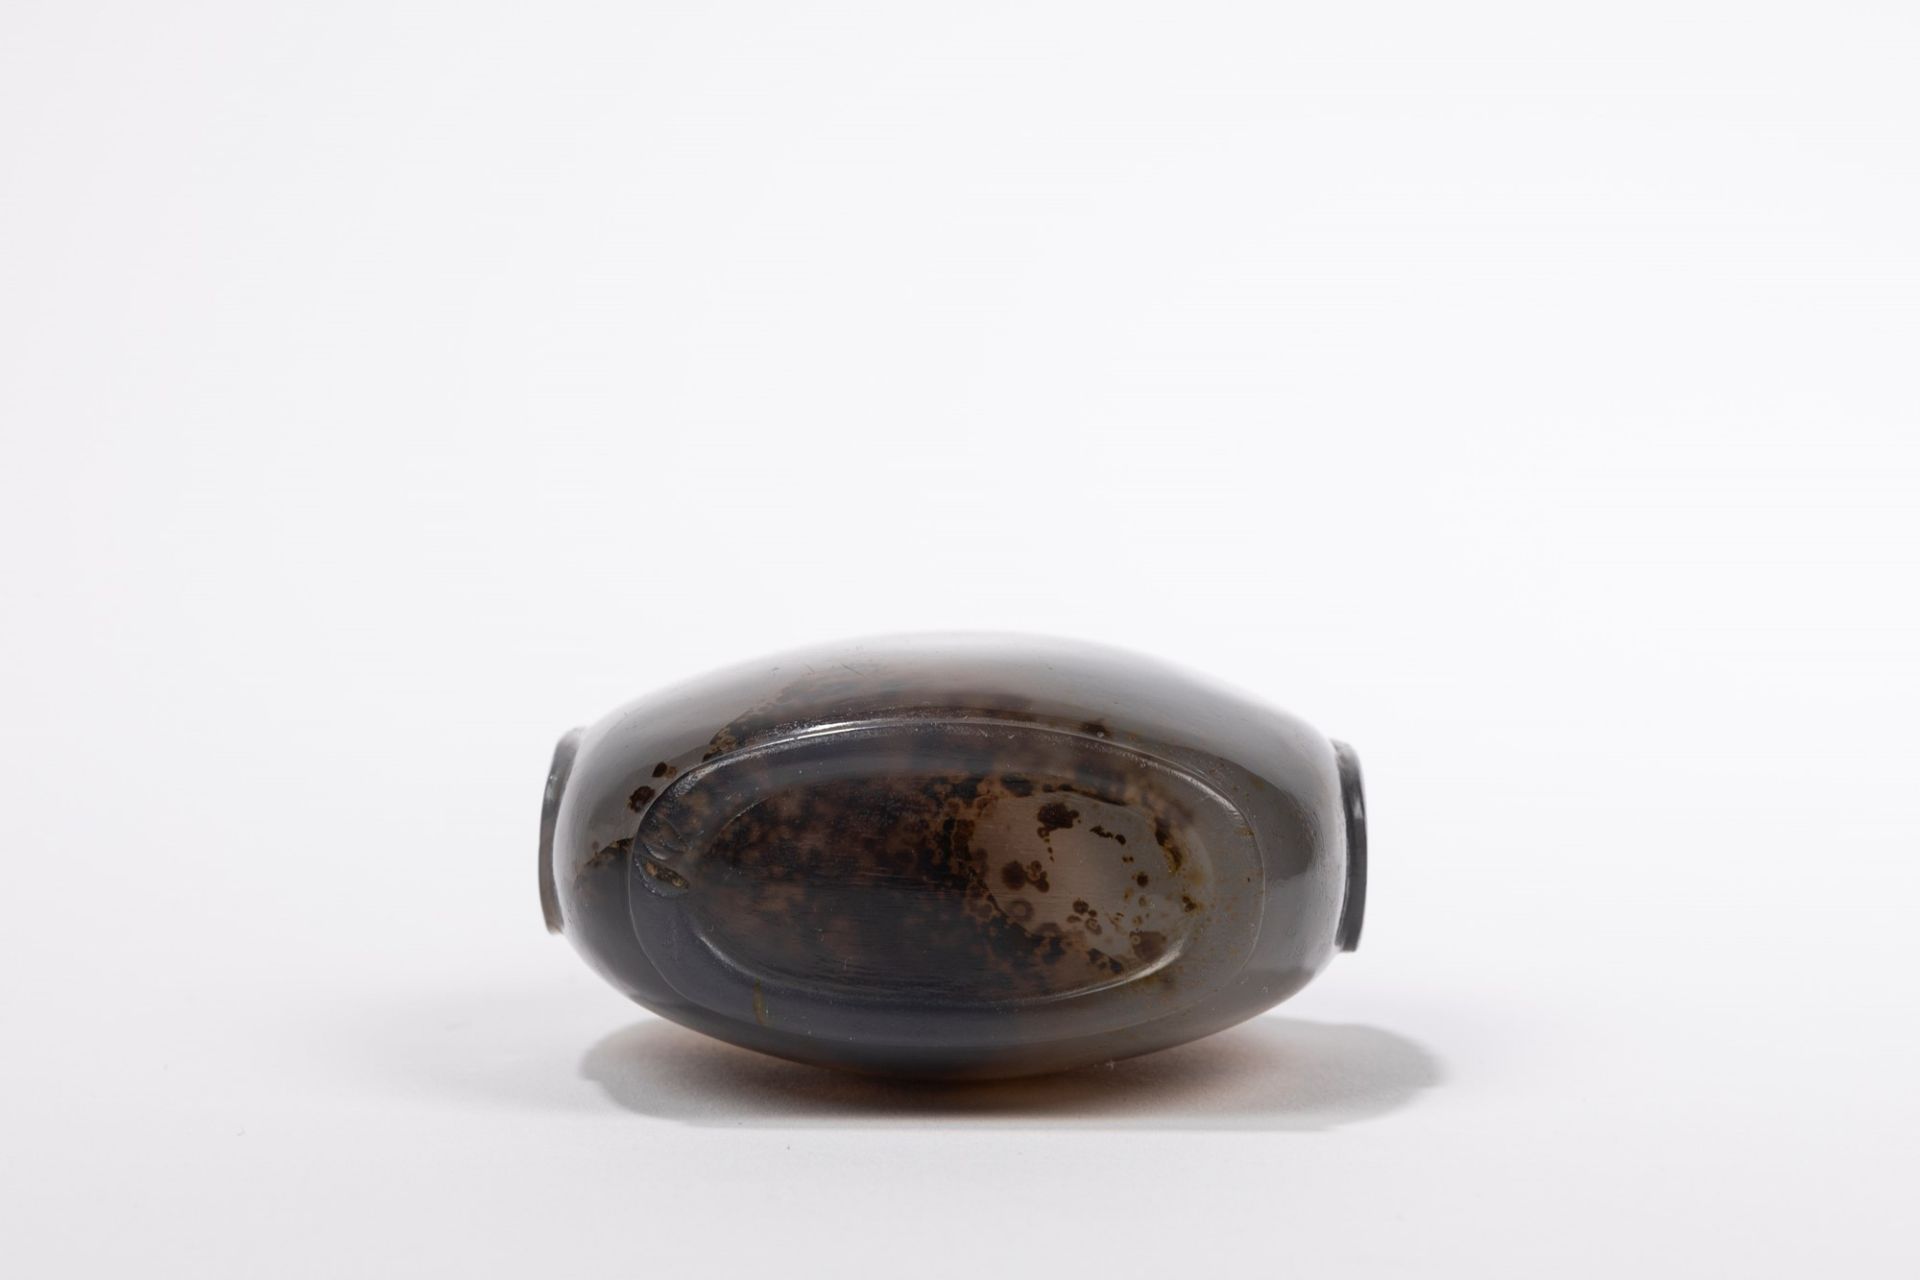 AN AGATE SNUFF BOTTLE, China, Qing dynasty, 19th century - Image 2 of 2